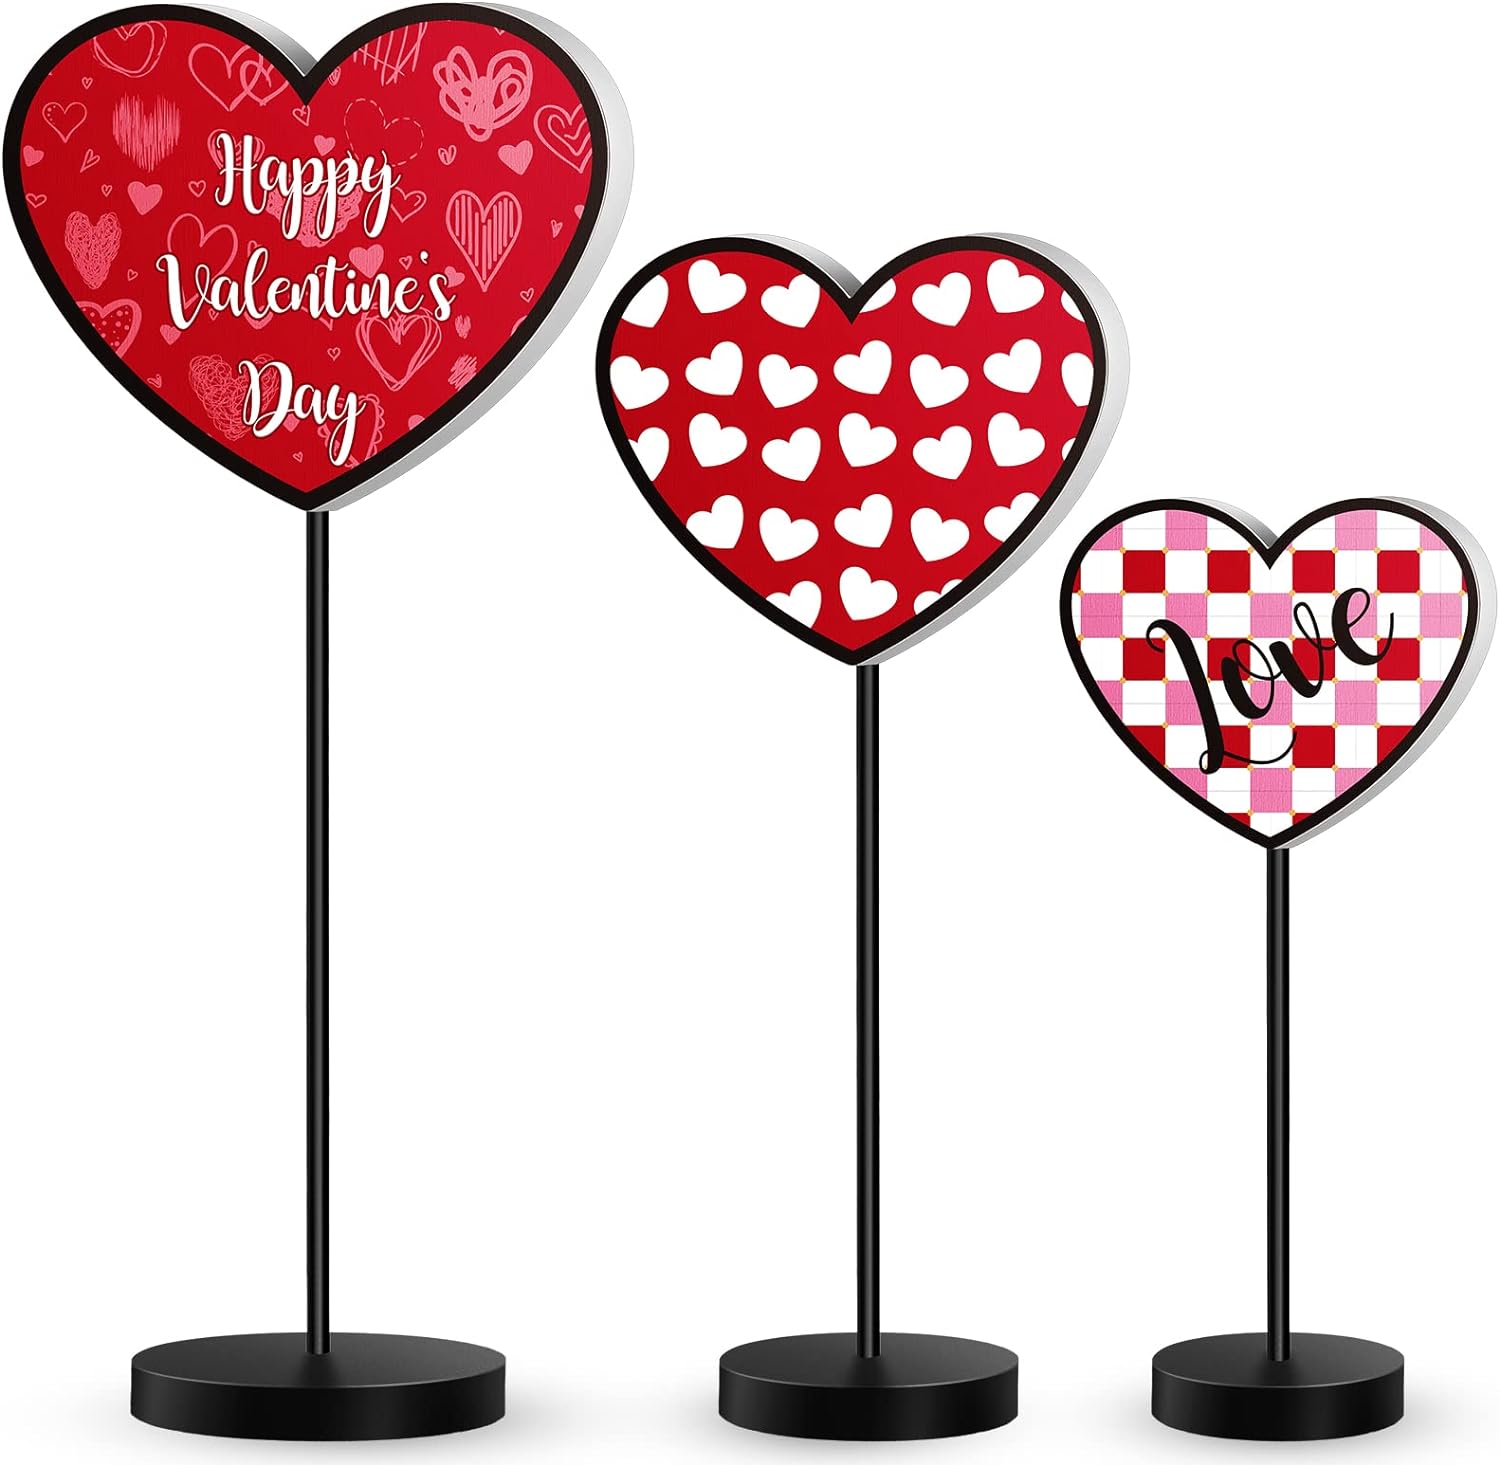 3 Pcs Valentines Day Heart Wooden Sign on Stand Valentines Day Wood Table Decor Heart Shaped Wood Decor Freestanding Heart Decorations Heart Tabletop Centerpiece for Wedding Home Party Favor Supplies